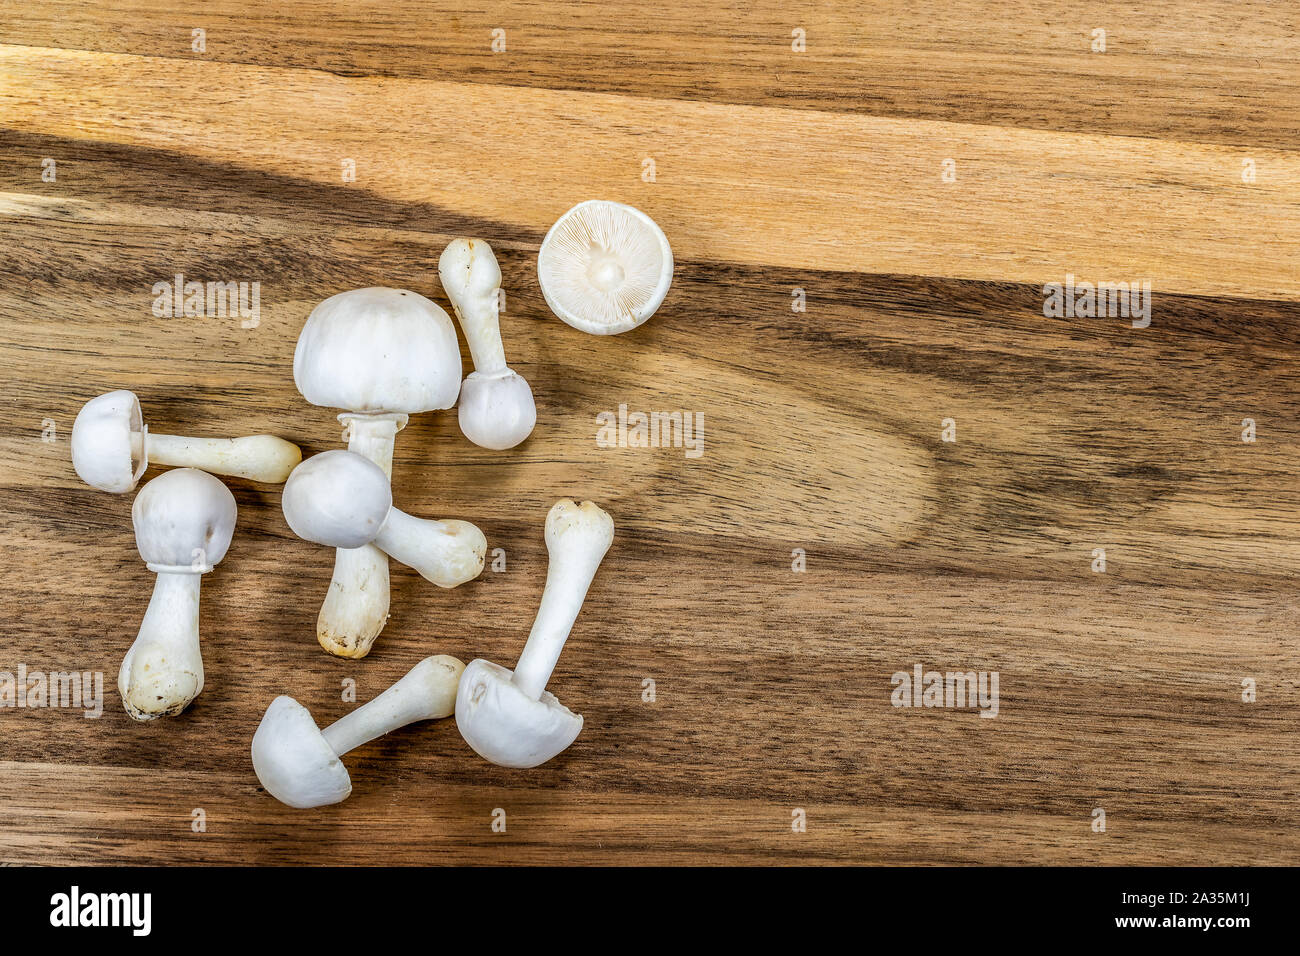 A group of white mushrooms isolated on wooden background. Stock Photo